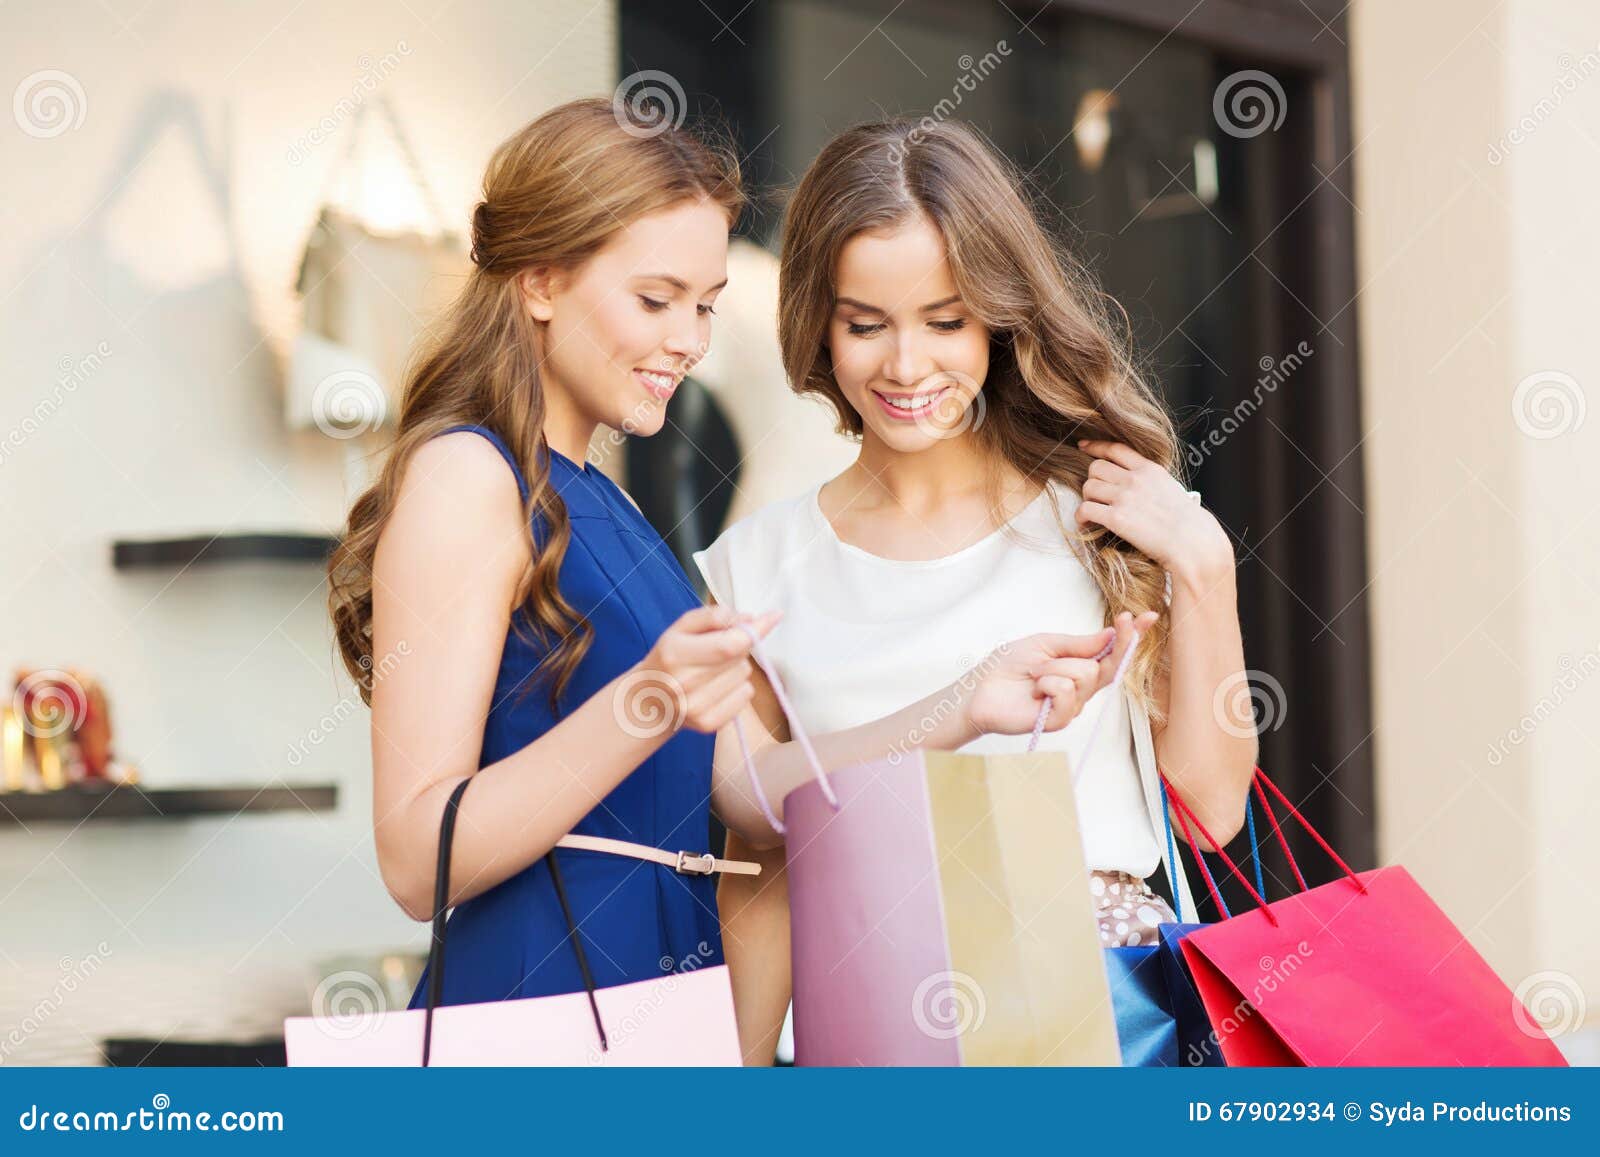 Happy Women with Shopping Bags at Shop Window Stock Photo - Image of ...